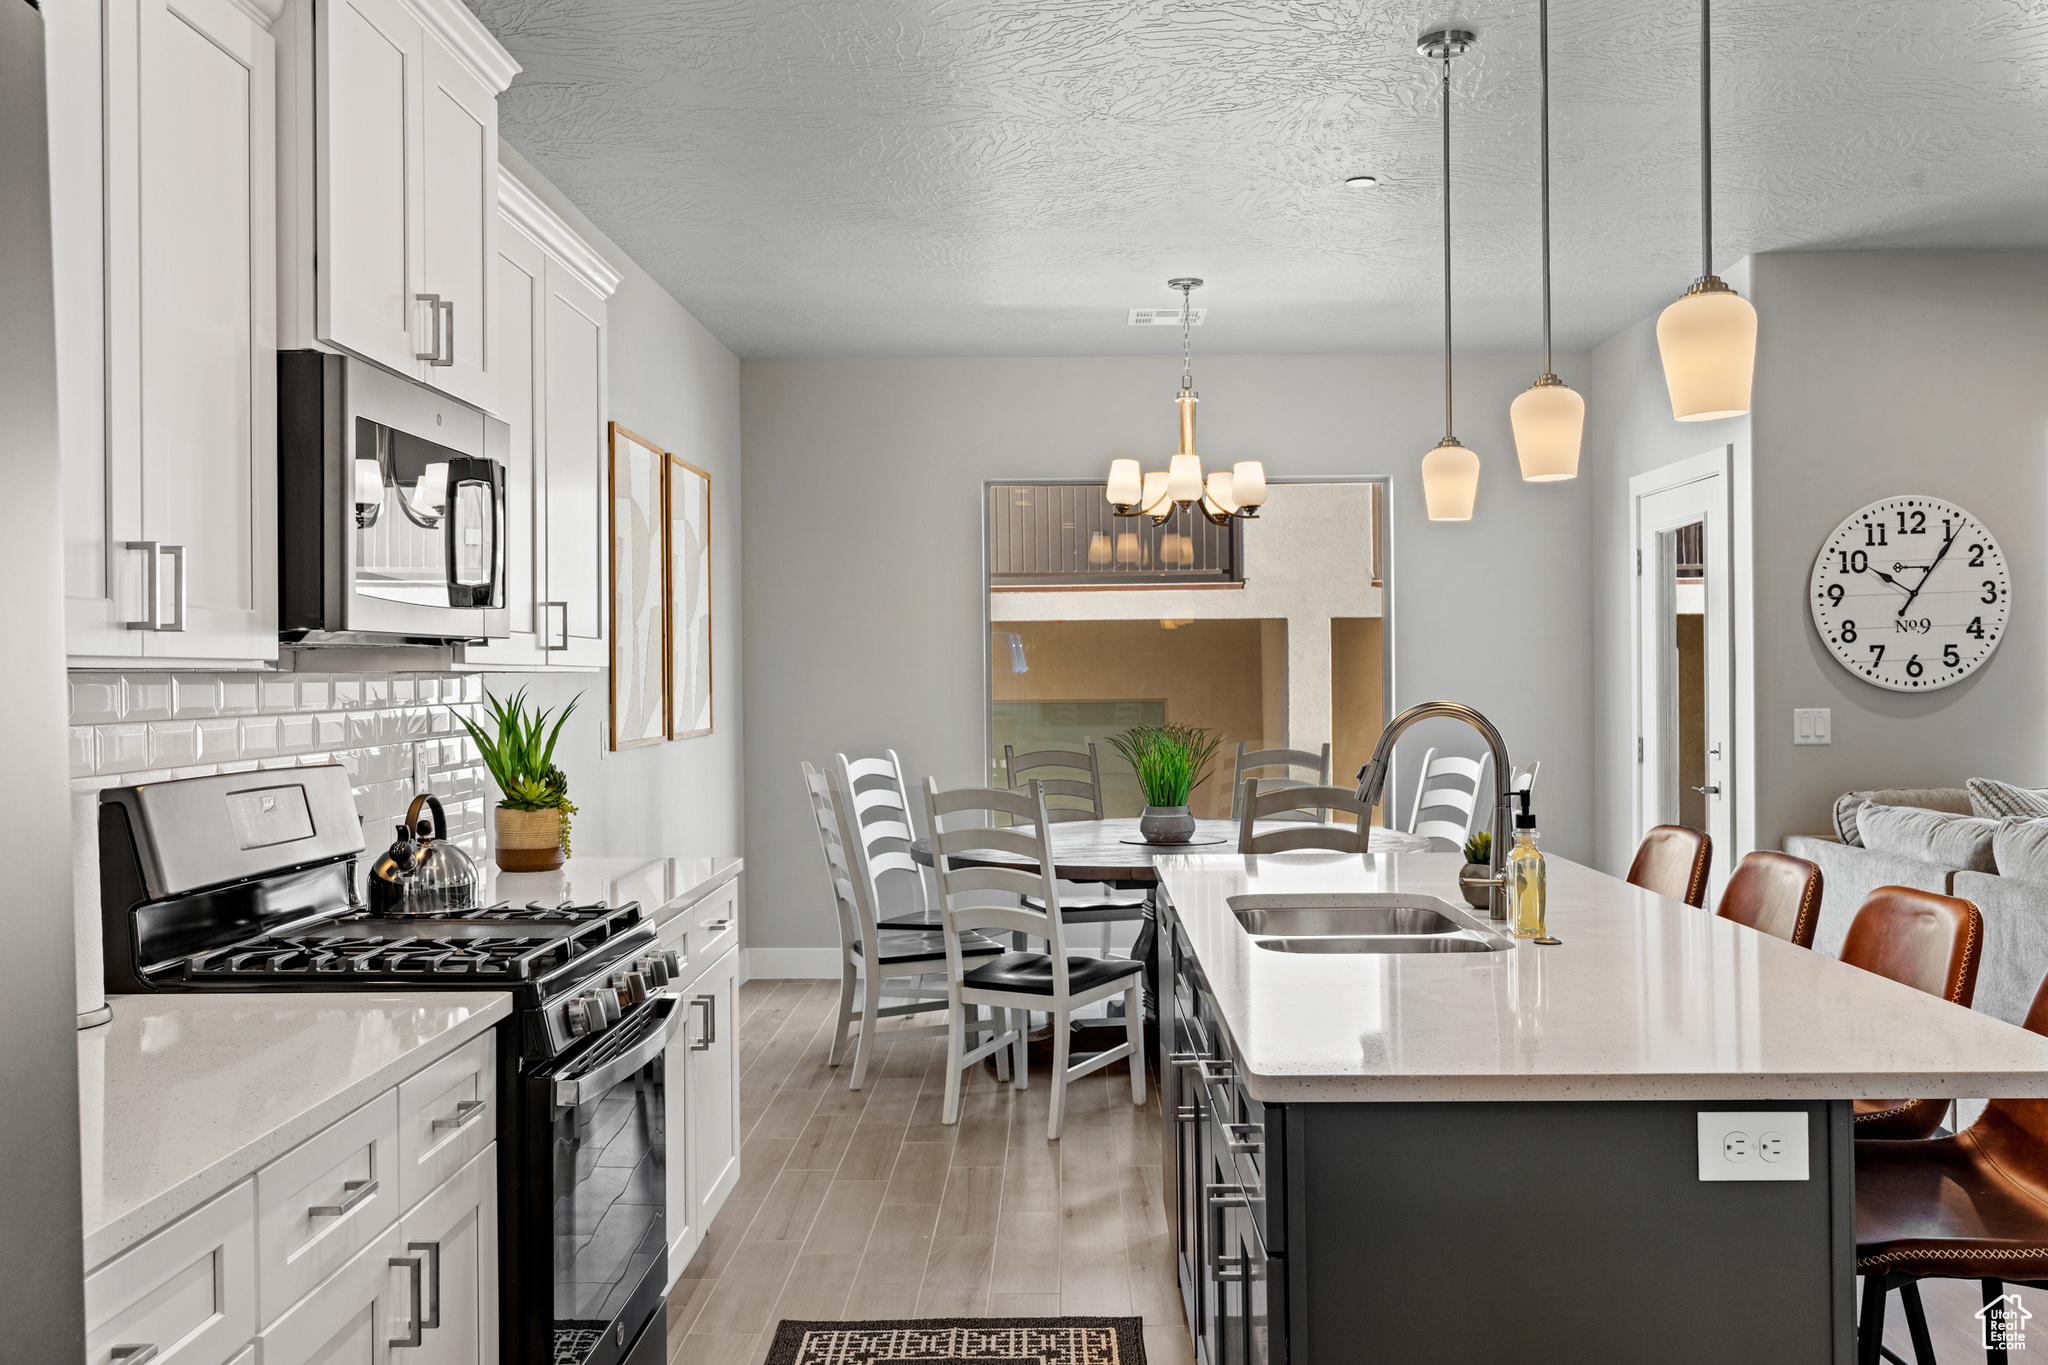 Kitchen featuring a kitchen bar, stainless steel appliances, a kitchen island with sink, sink, and pendant lighting